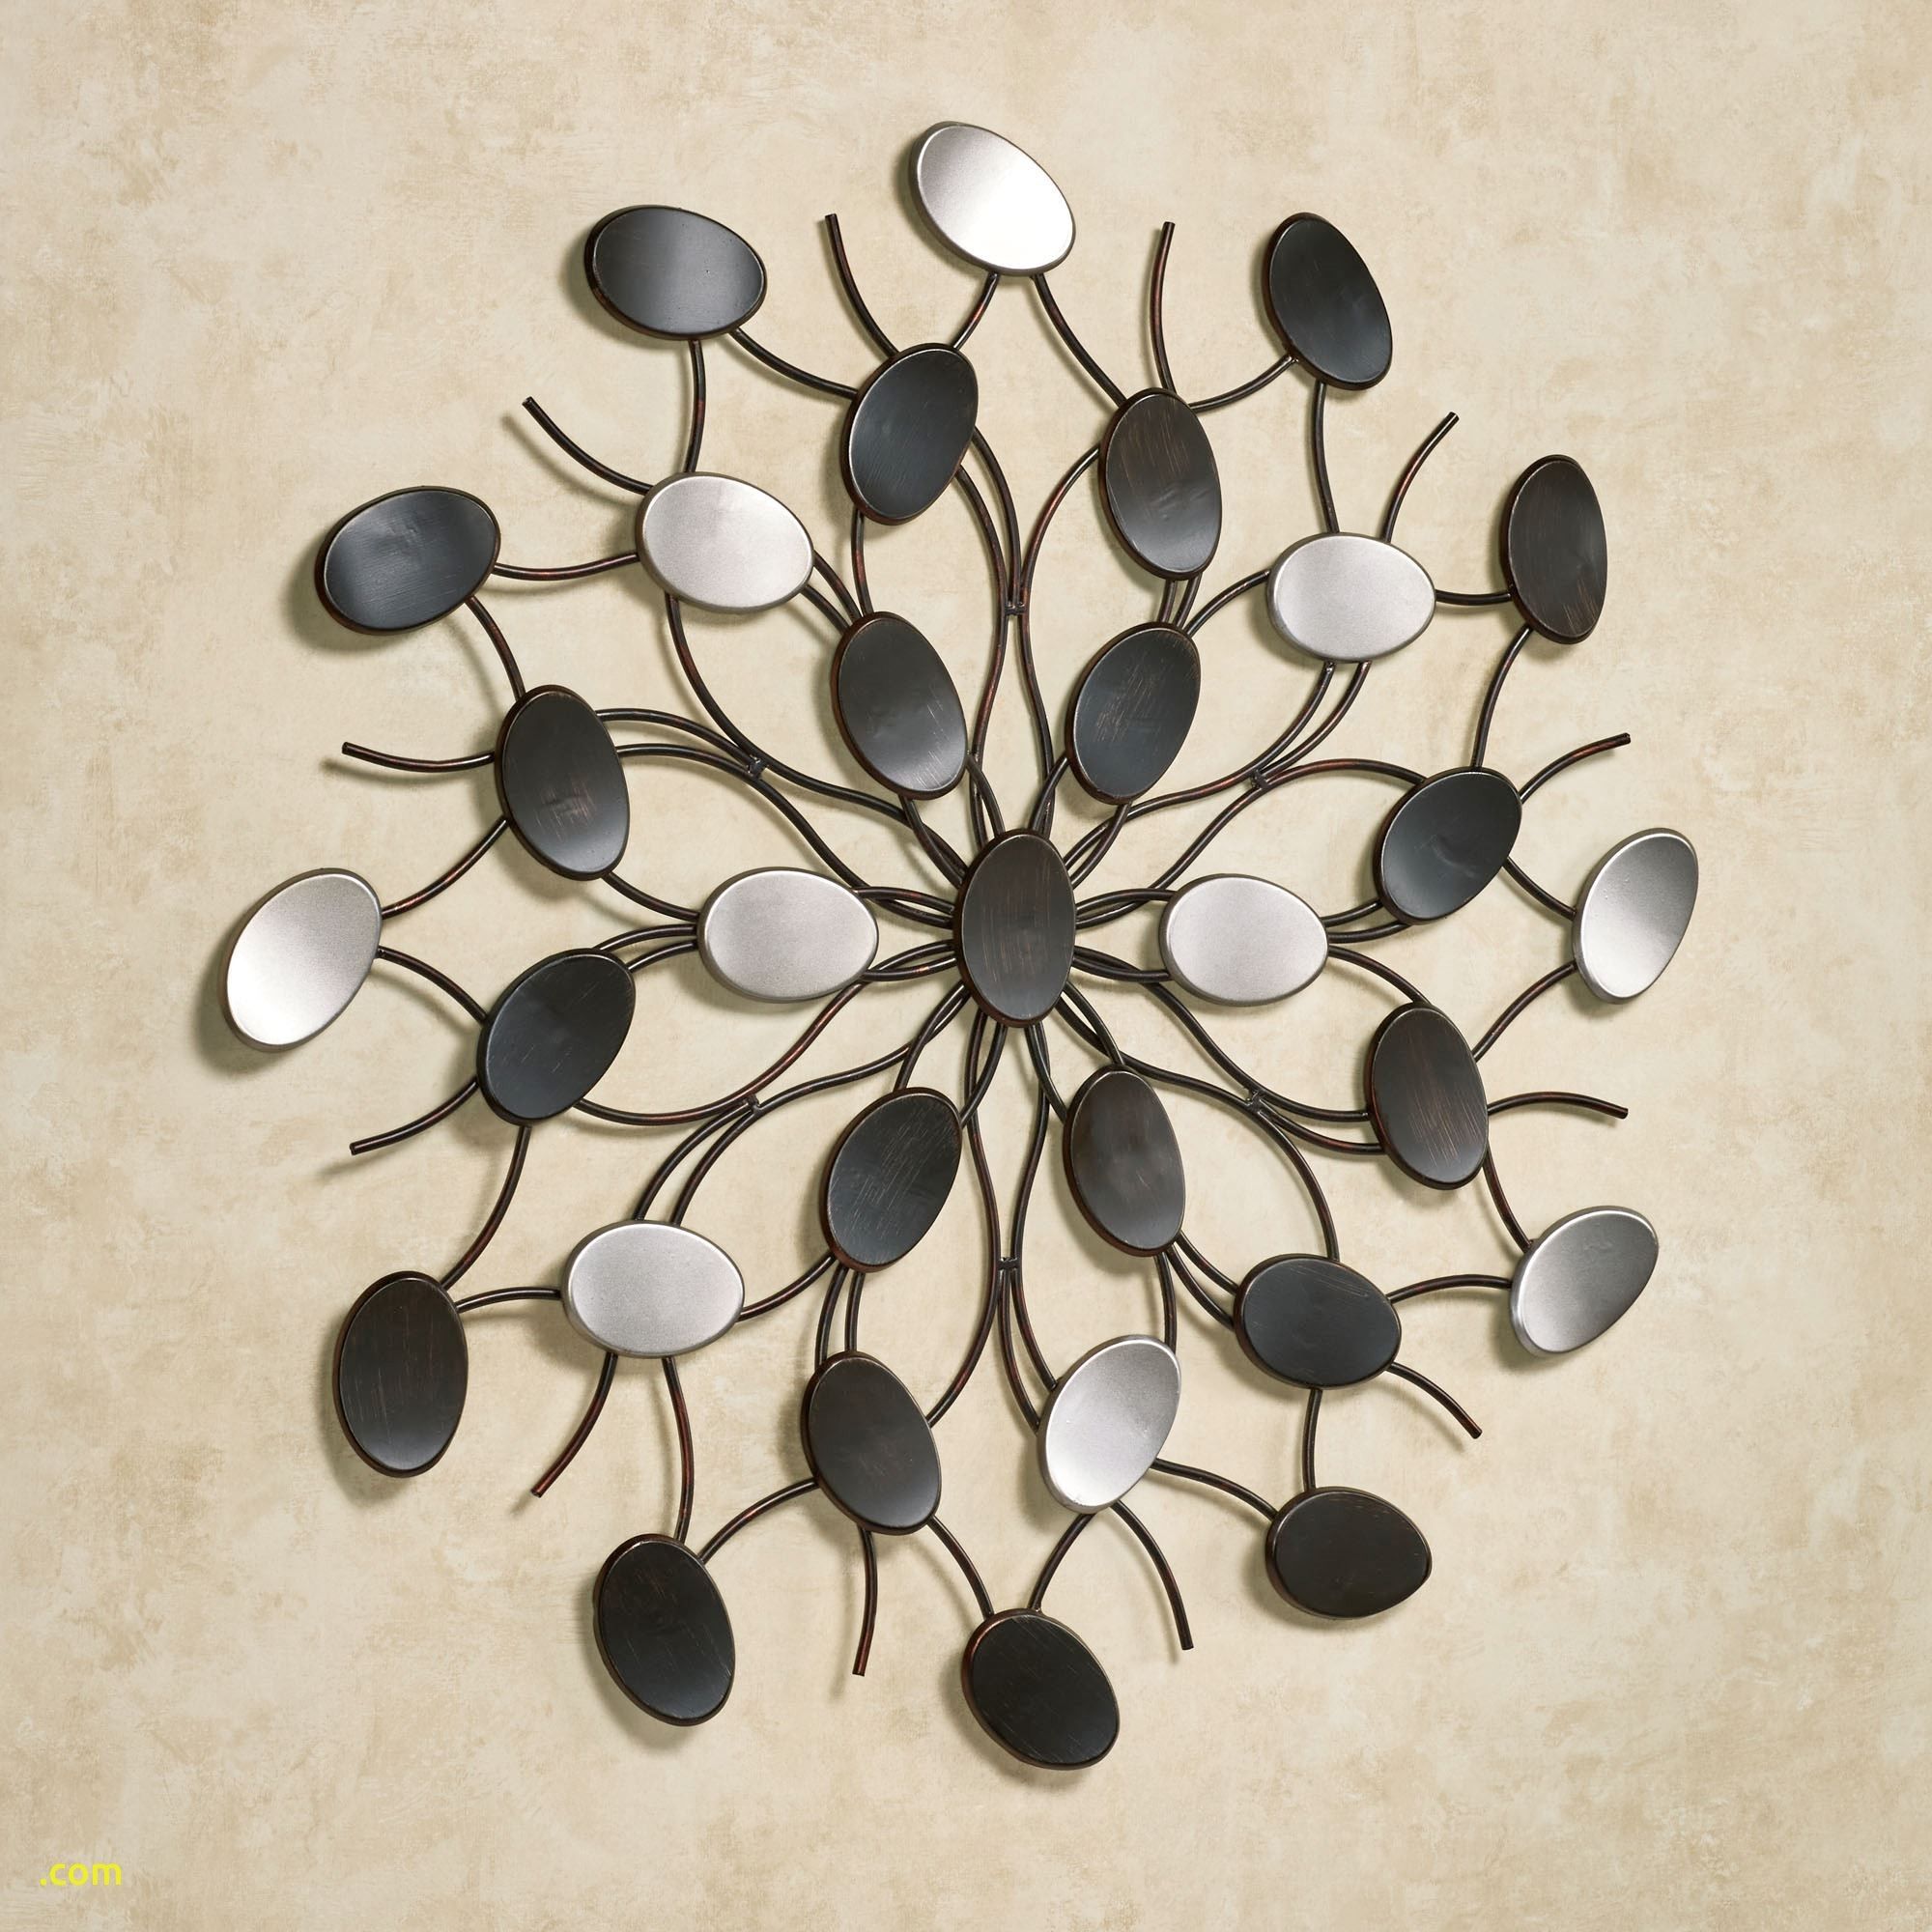 Furniture : Awesome Curved Metal Wall Art Best Of Radiant Petals For Most Current Abstract Iron Wall Art (View 16 of 20)